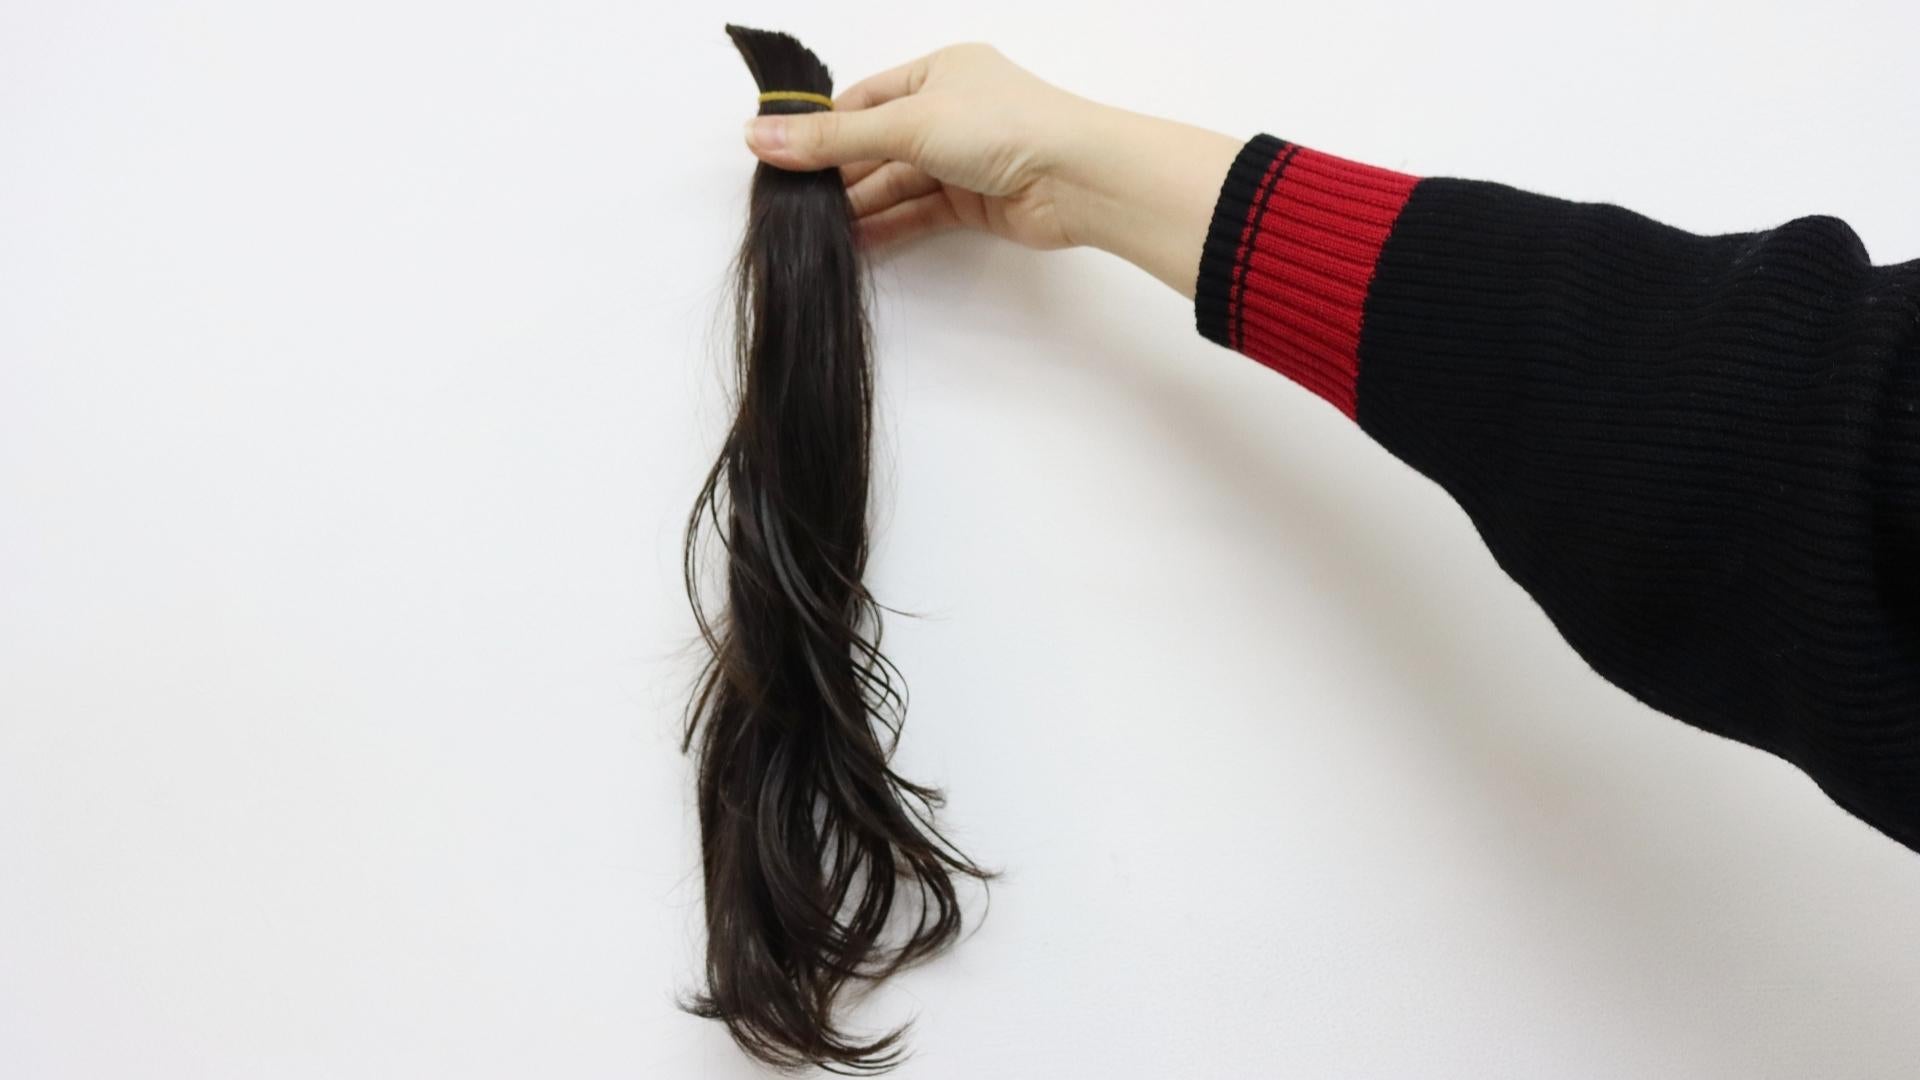 Hair Donation Requirements: How to Donate Hair